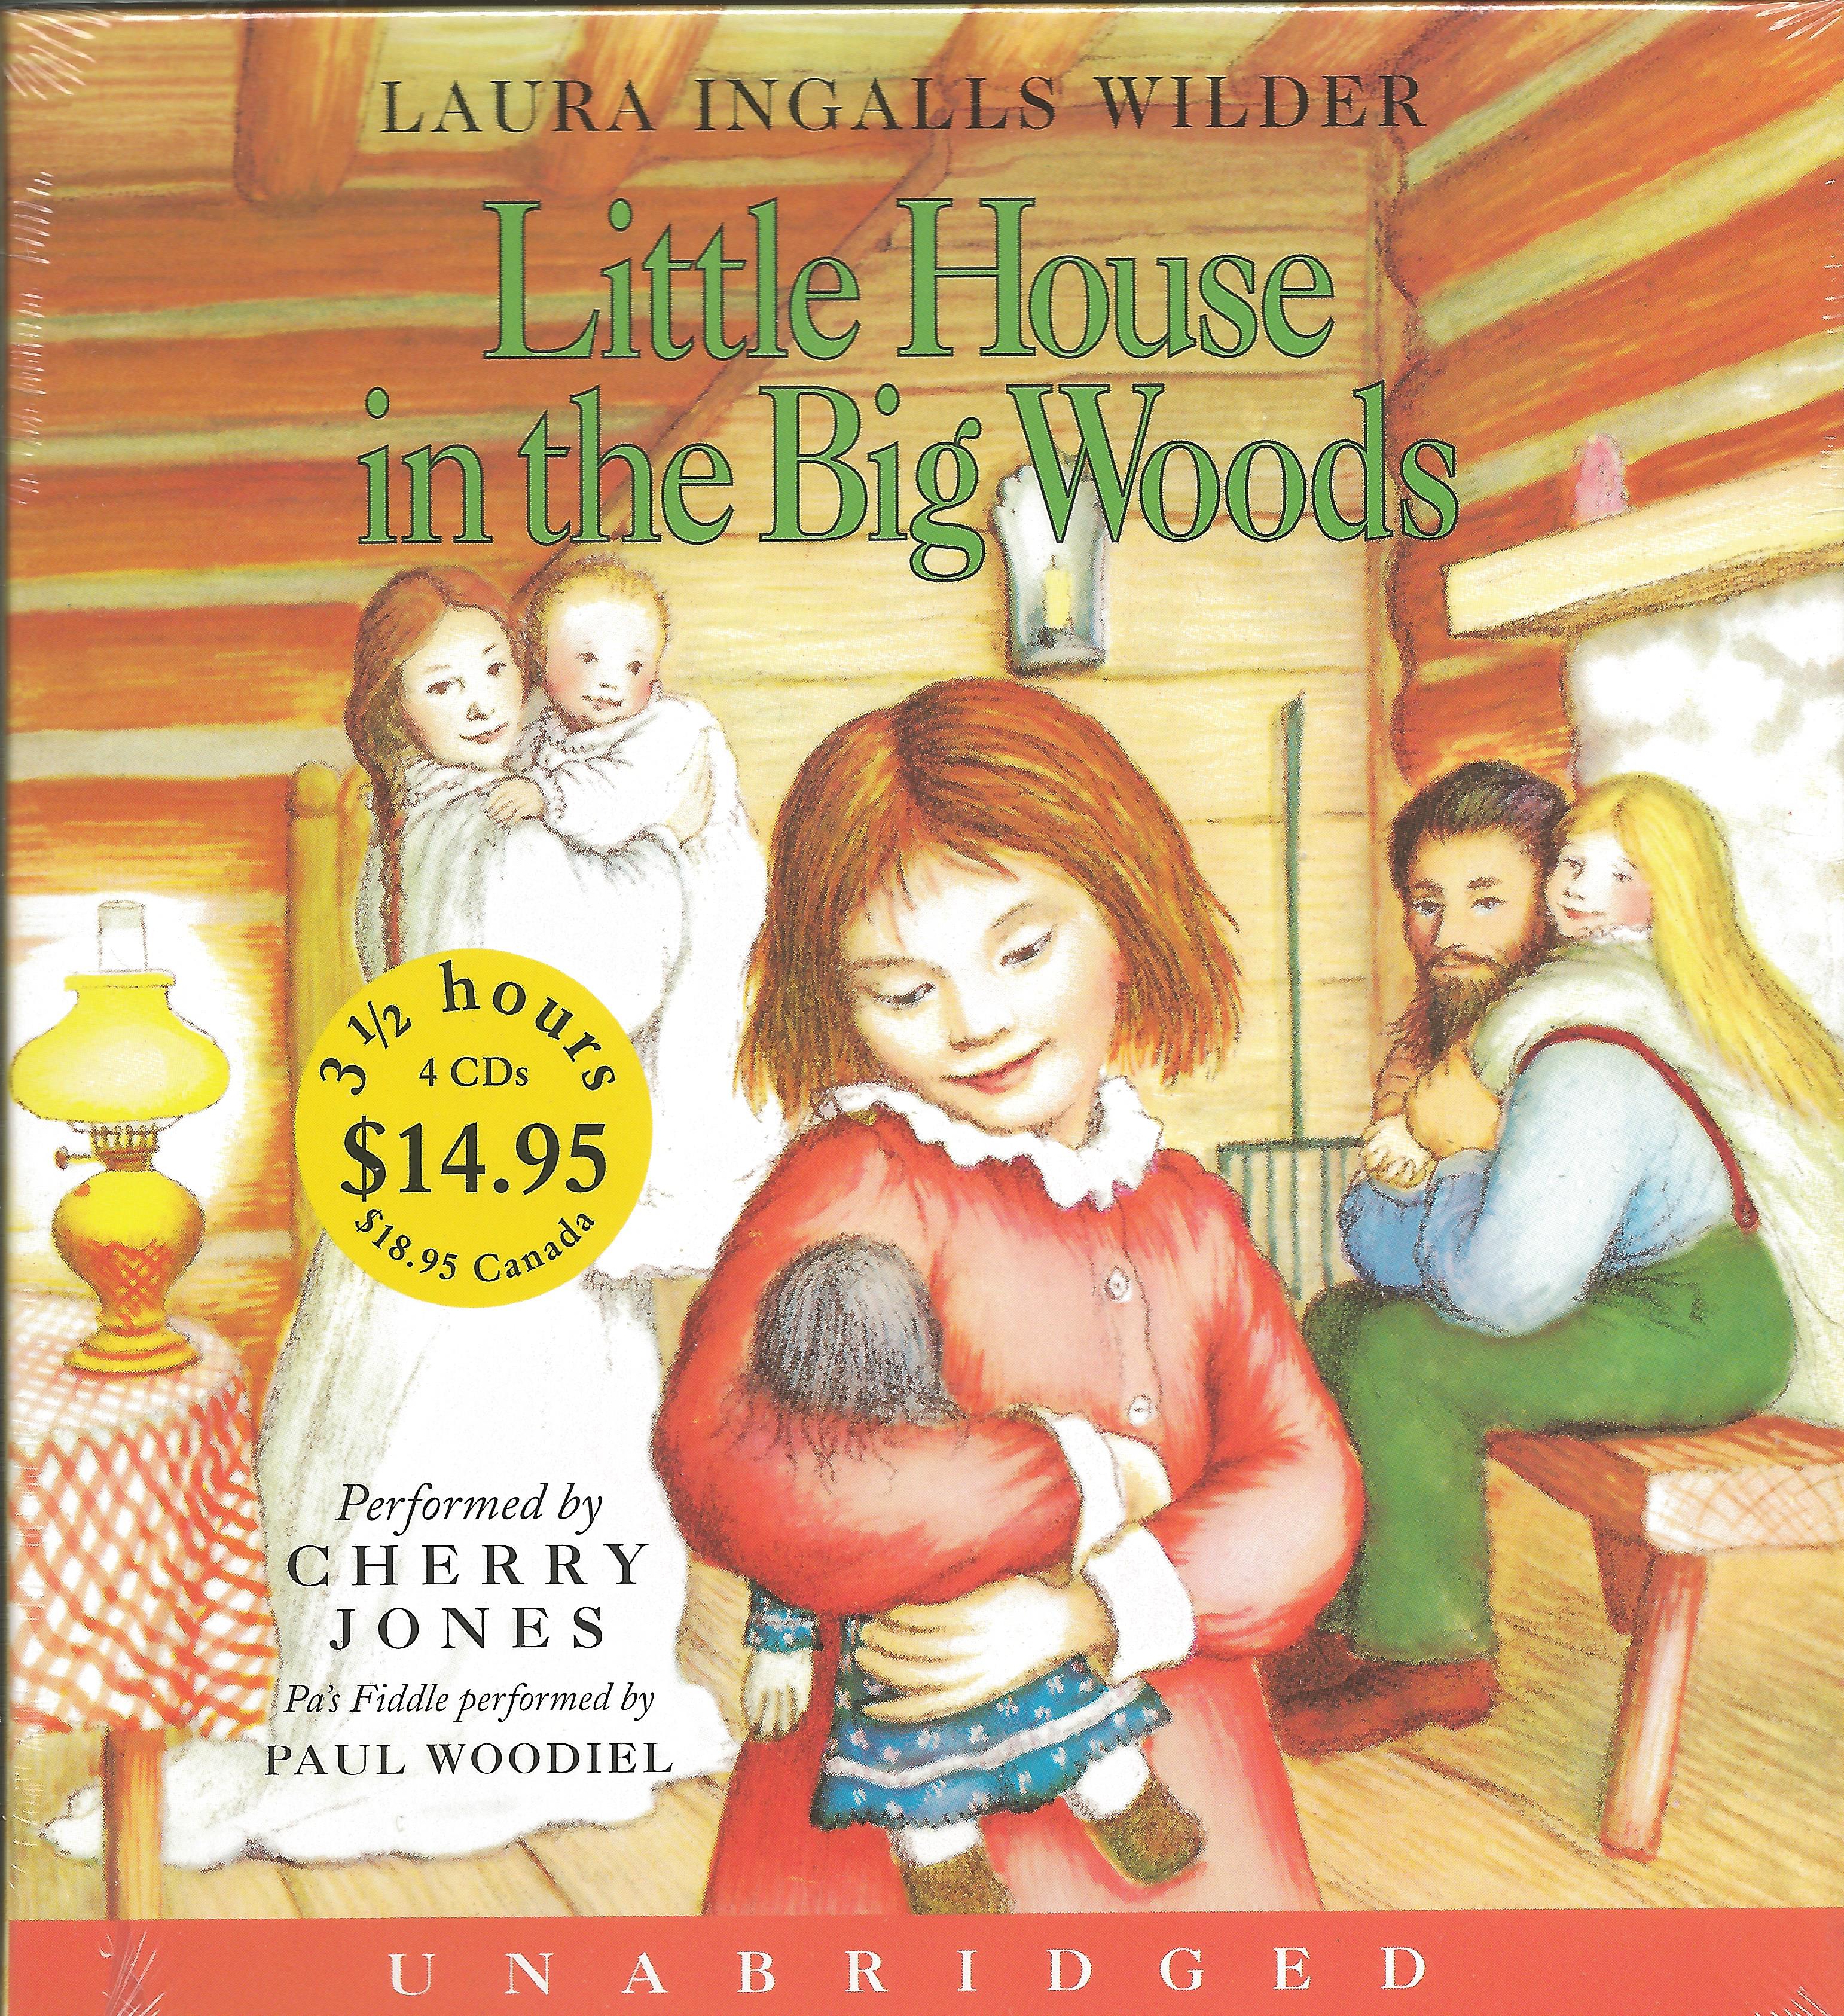 LITTLE HOUSE IN THE BIG WOODS - AUDIO CD Laura Ingalls Wilder - Click Image to Close